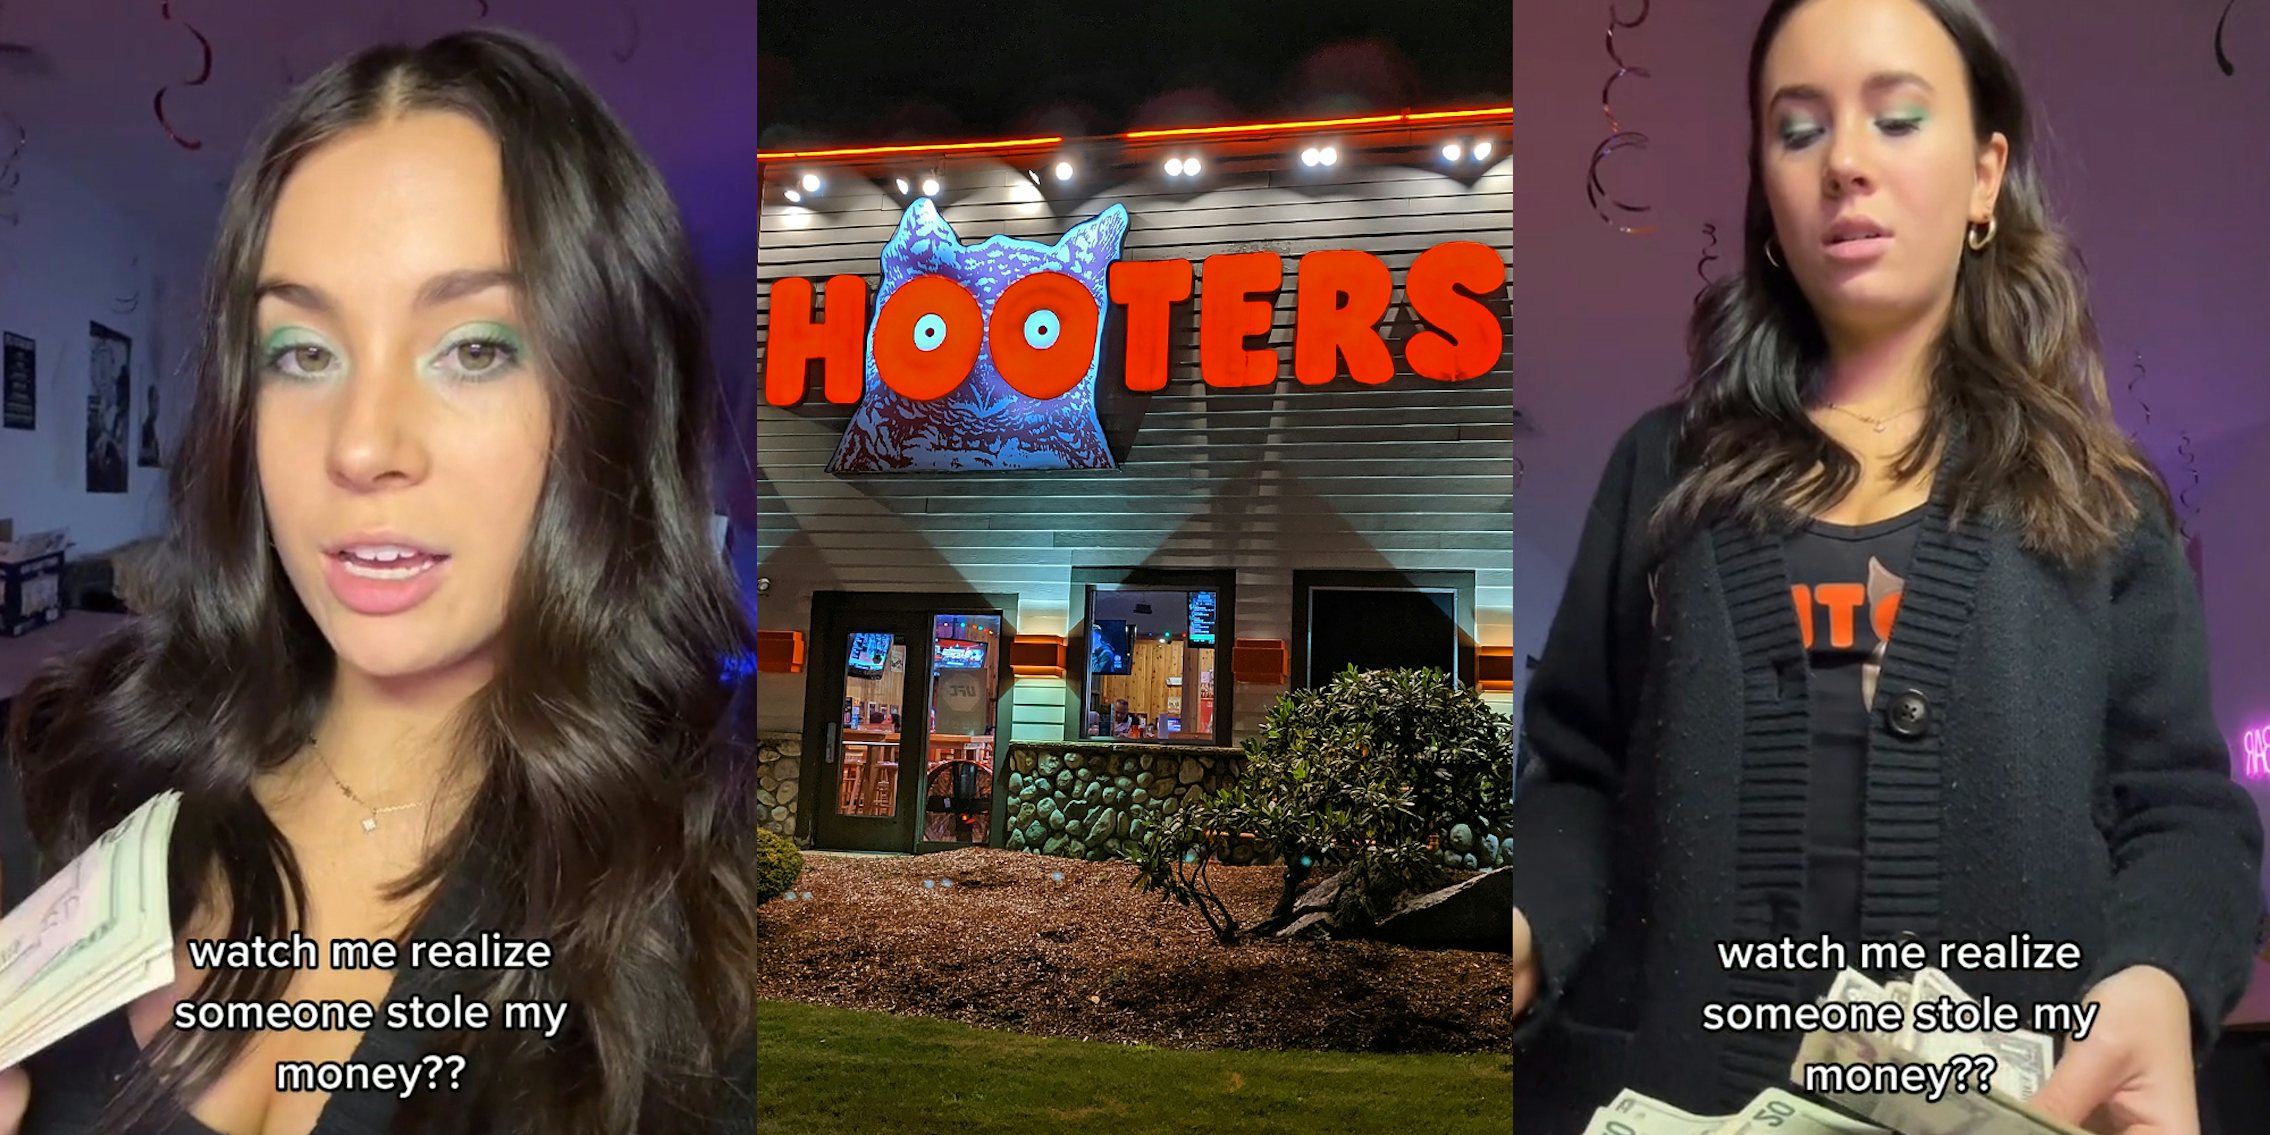 Hooter's server speaking holding cash with caption 'watch me realize someone stole my money??' (l) Hooter's building with sign at night (c) Hooter's server speaking holding cash with caption 'watch me realize someone stole my money??' (r)